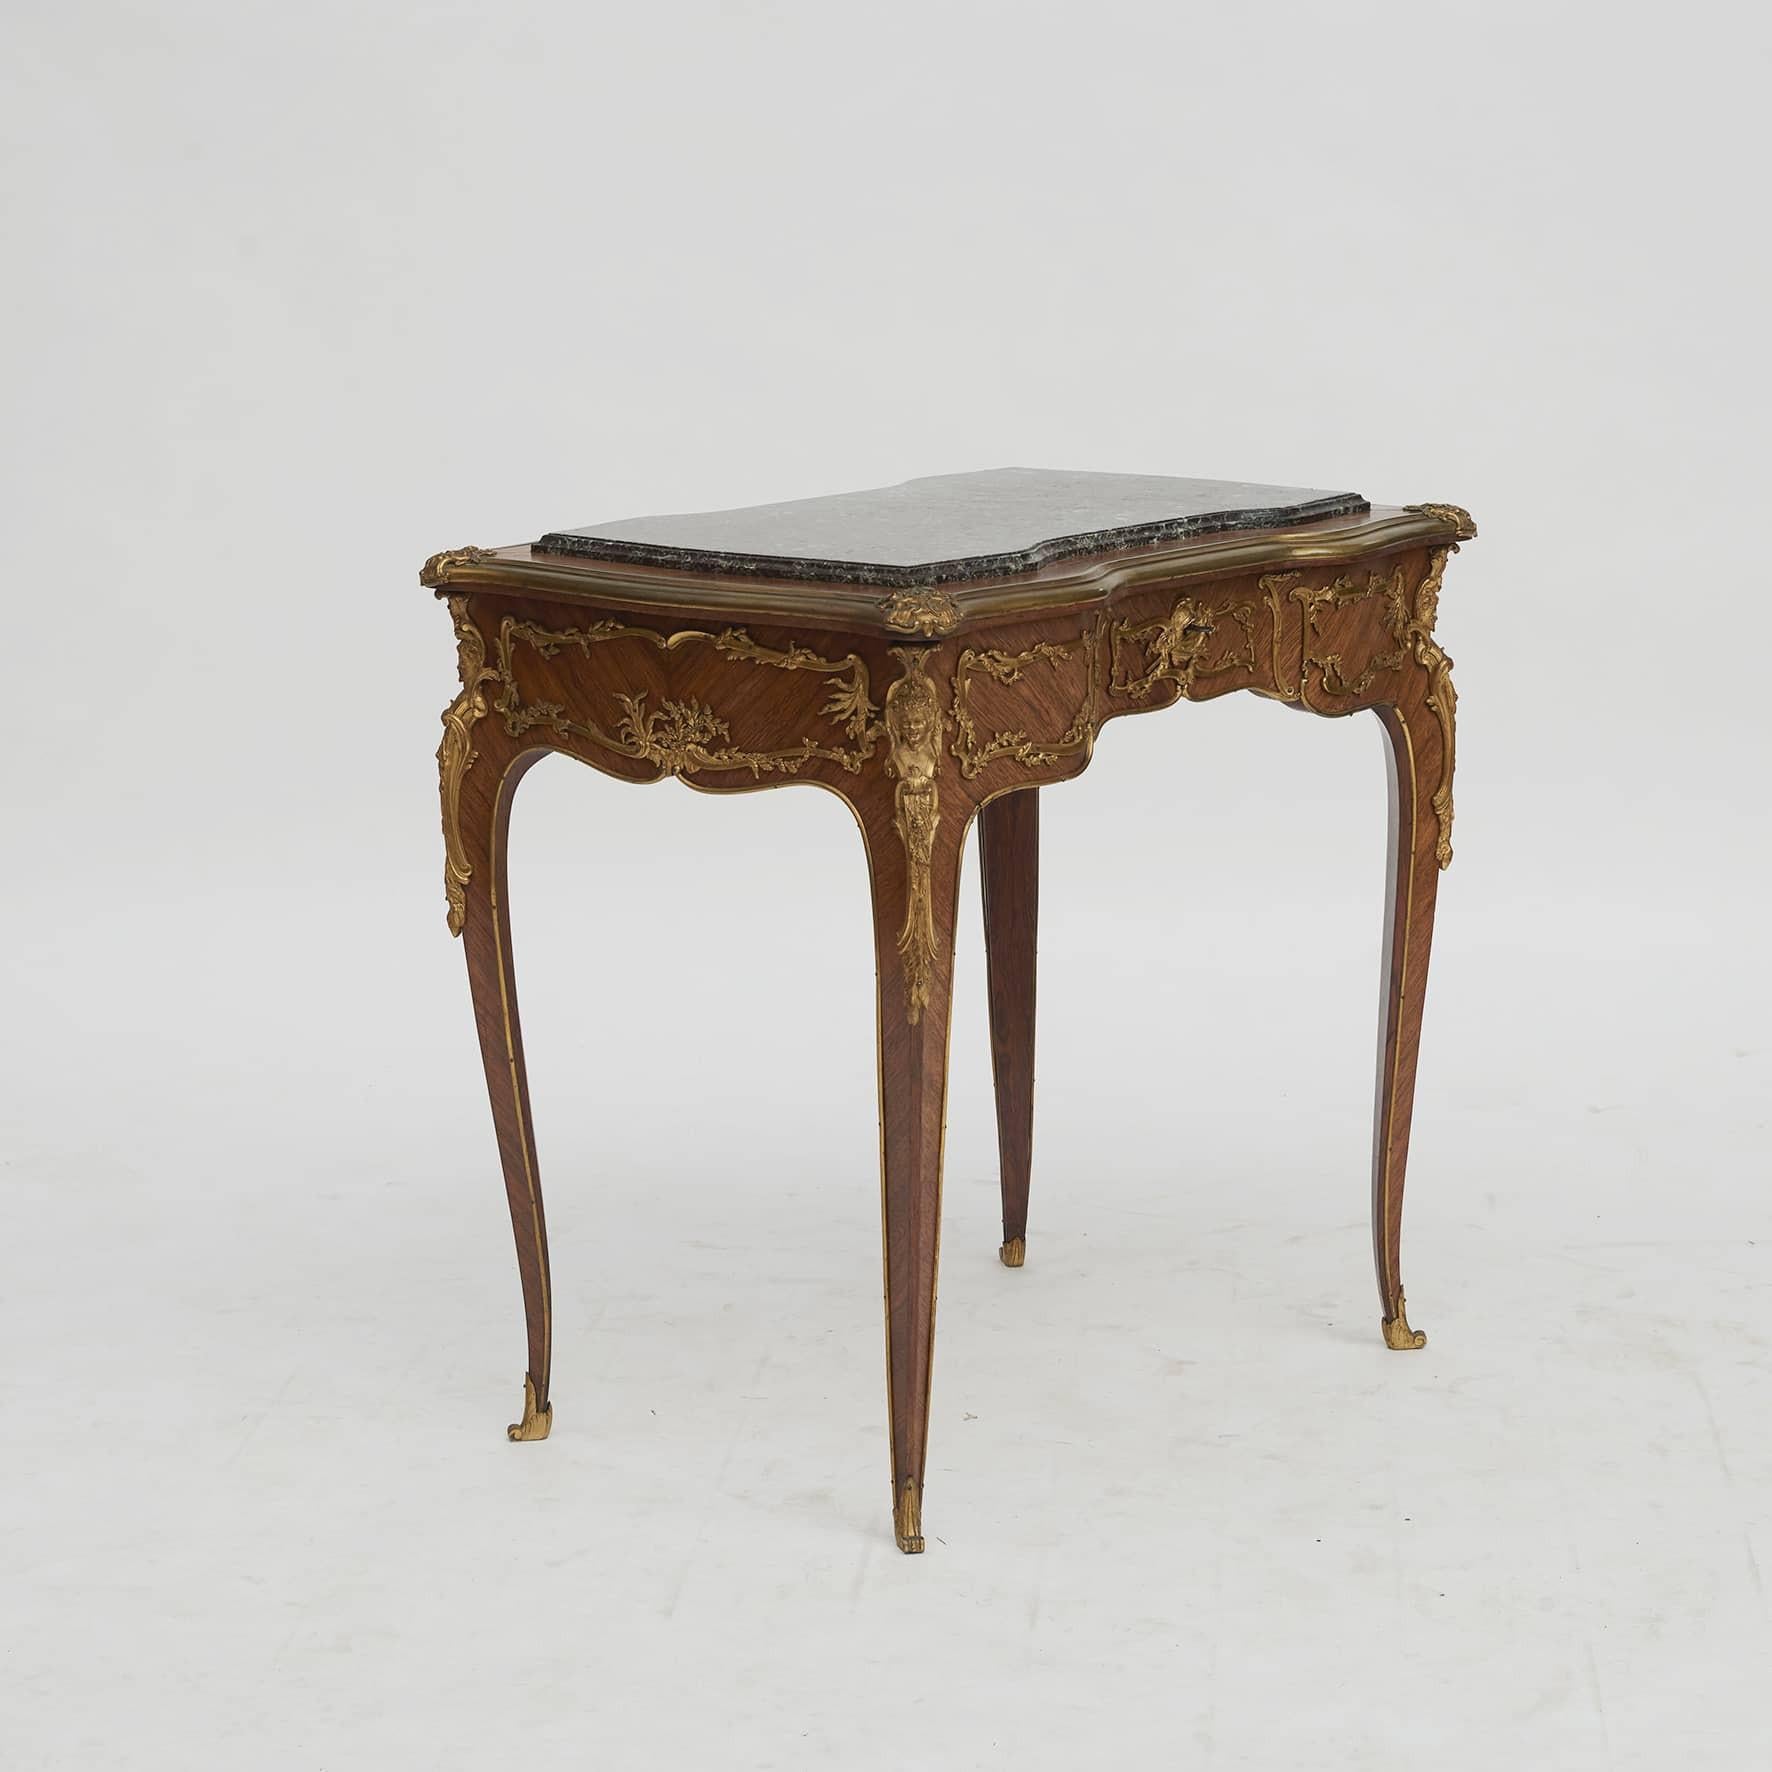 French side table crafted from gilt bronze mounted Kingswood.
Slightly raised top in Rosso Levanto marble in shades of red, green and grey.
France c. 1890.
This exquisite quality side table is attributed to the important furniture maker